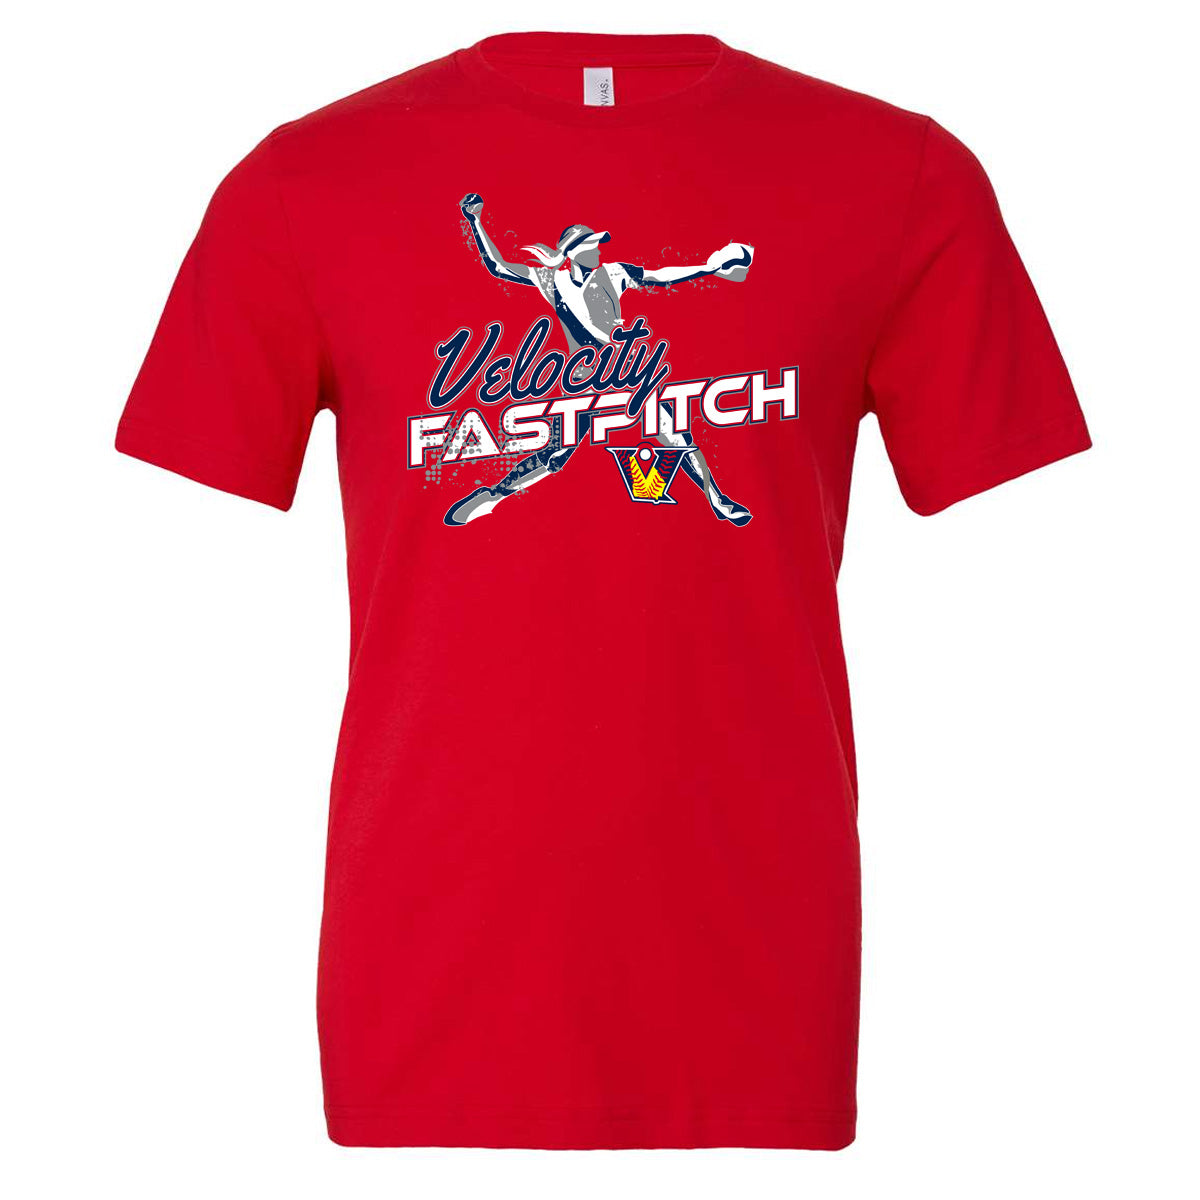 Velo FP - Velocity Fastpitch with Player - Red (Tee/Hoodie/Sweatshirt) - Southern Grace Creations